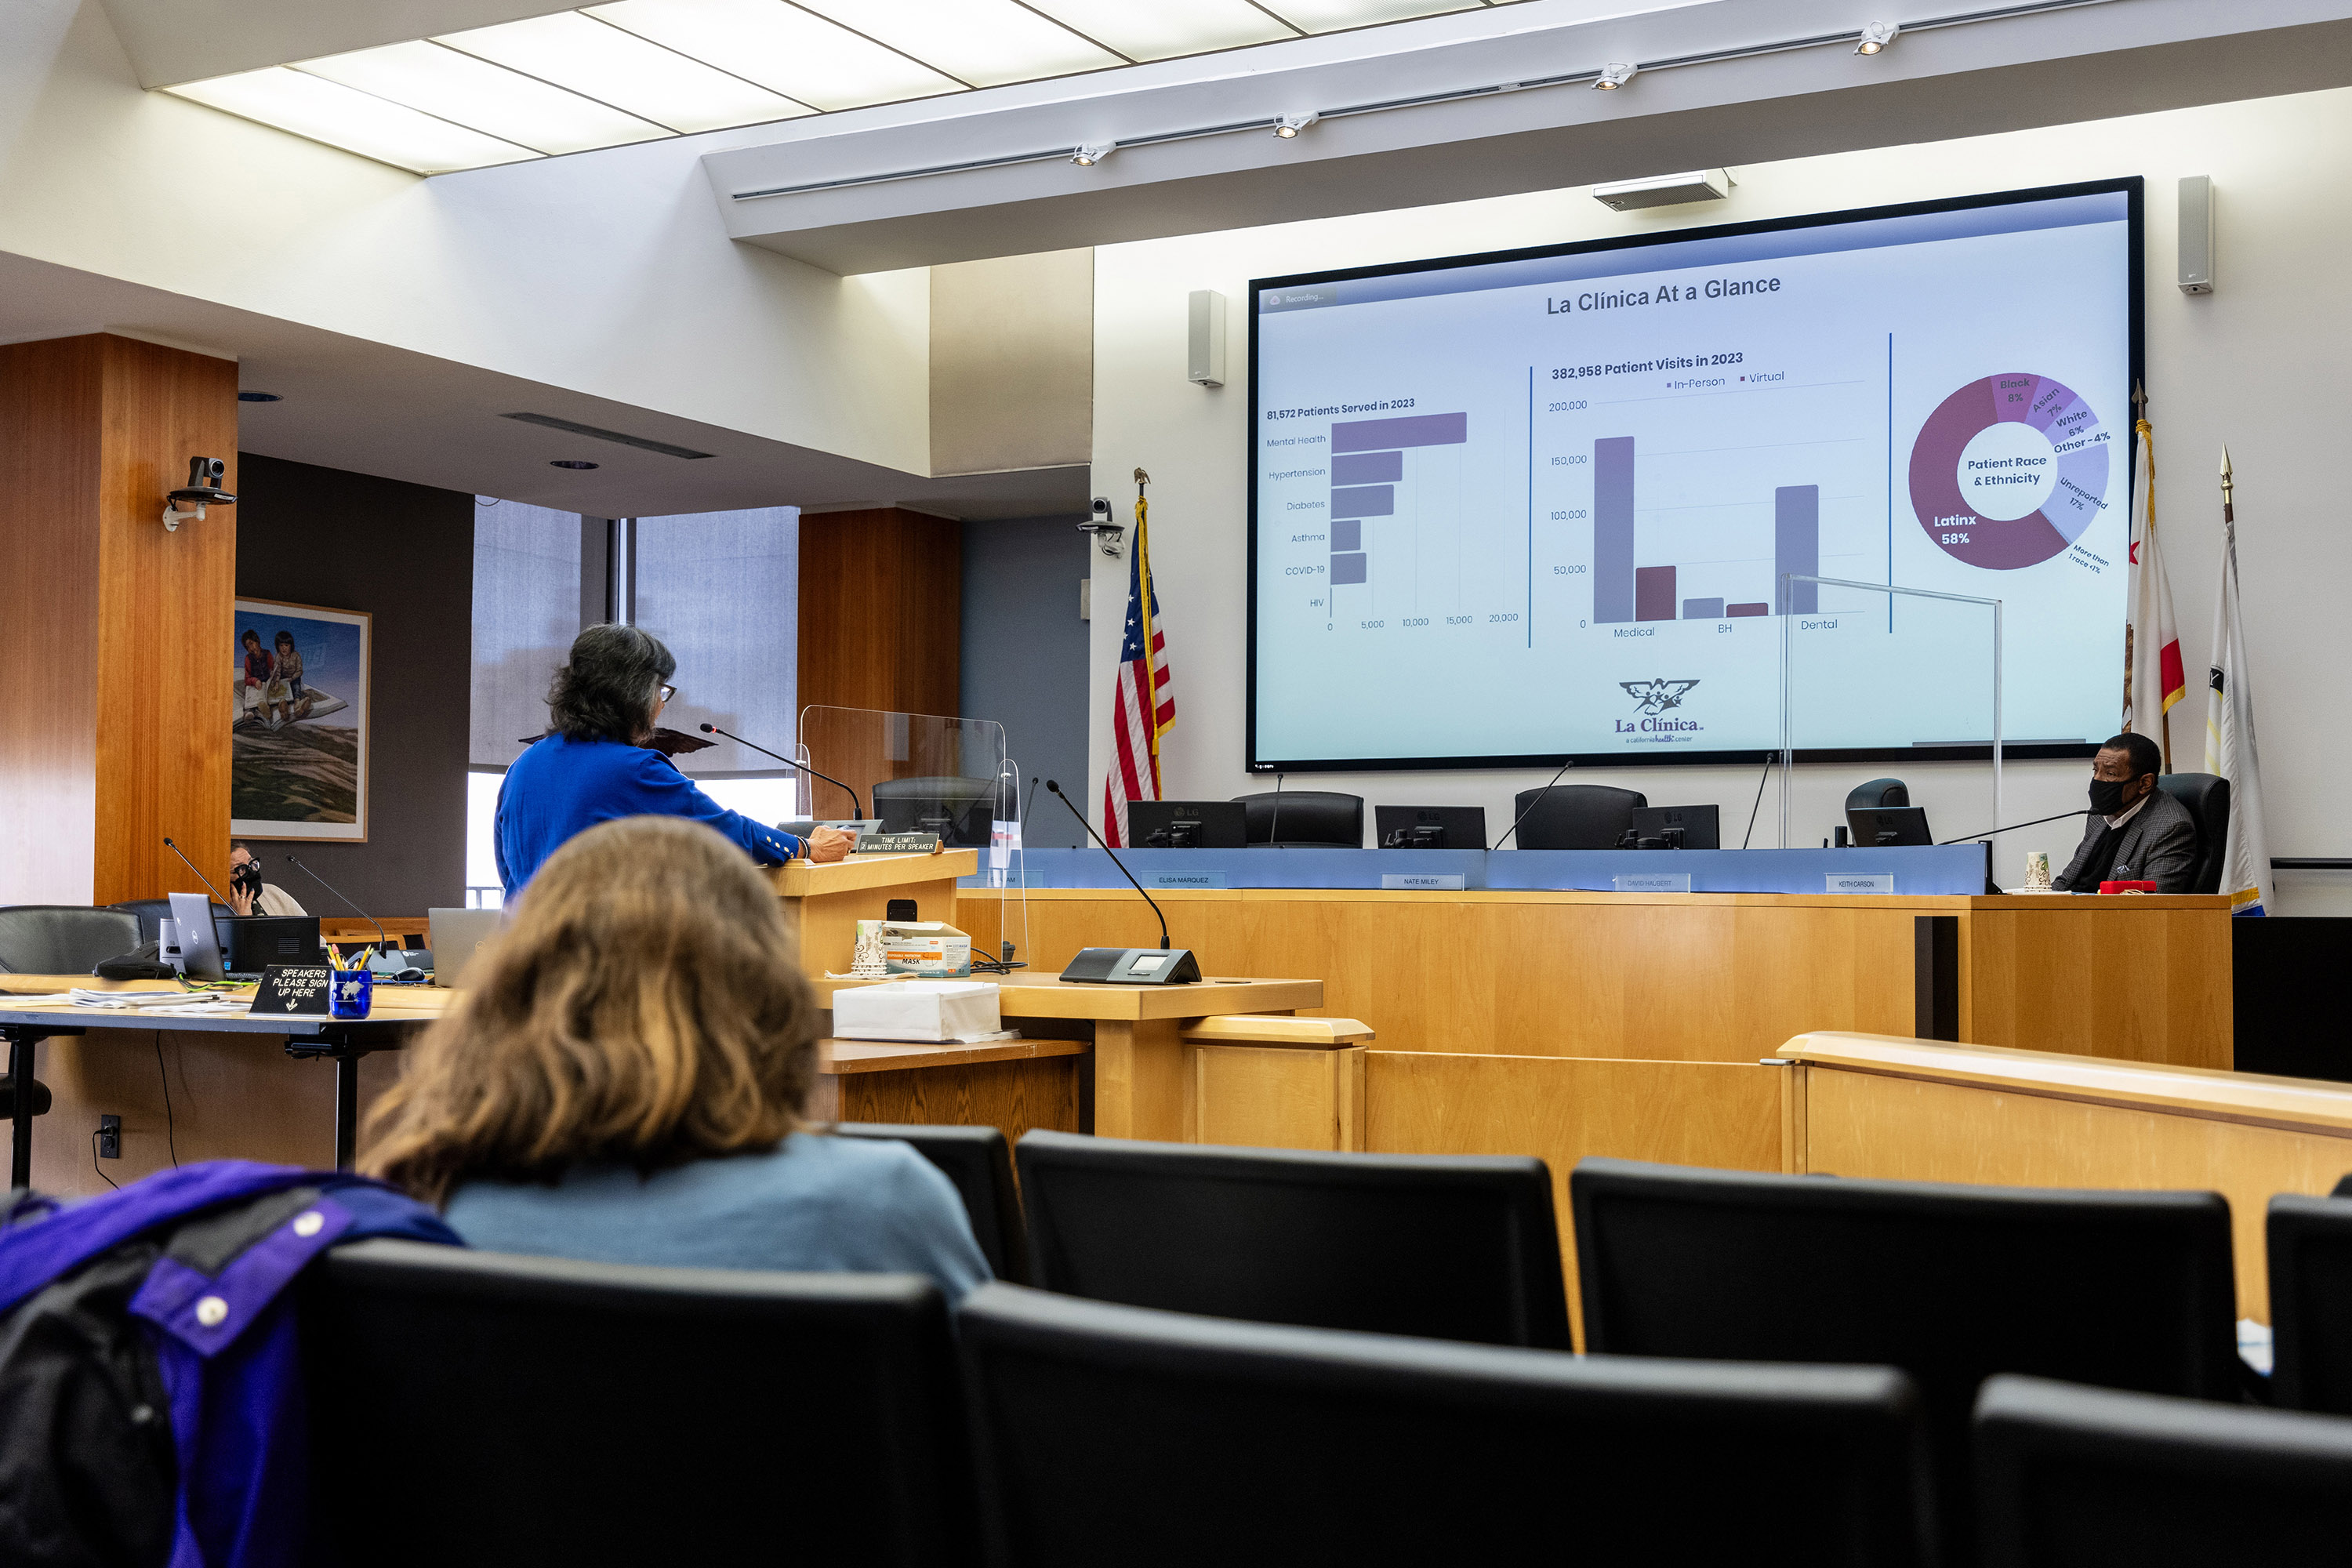 Jane Garcia gives a testimony in a court room. There are charts being shown on a large screen at the front of a room, titled "La Clínica At a Glance."